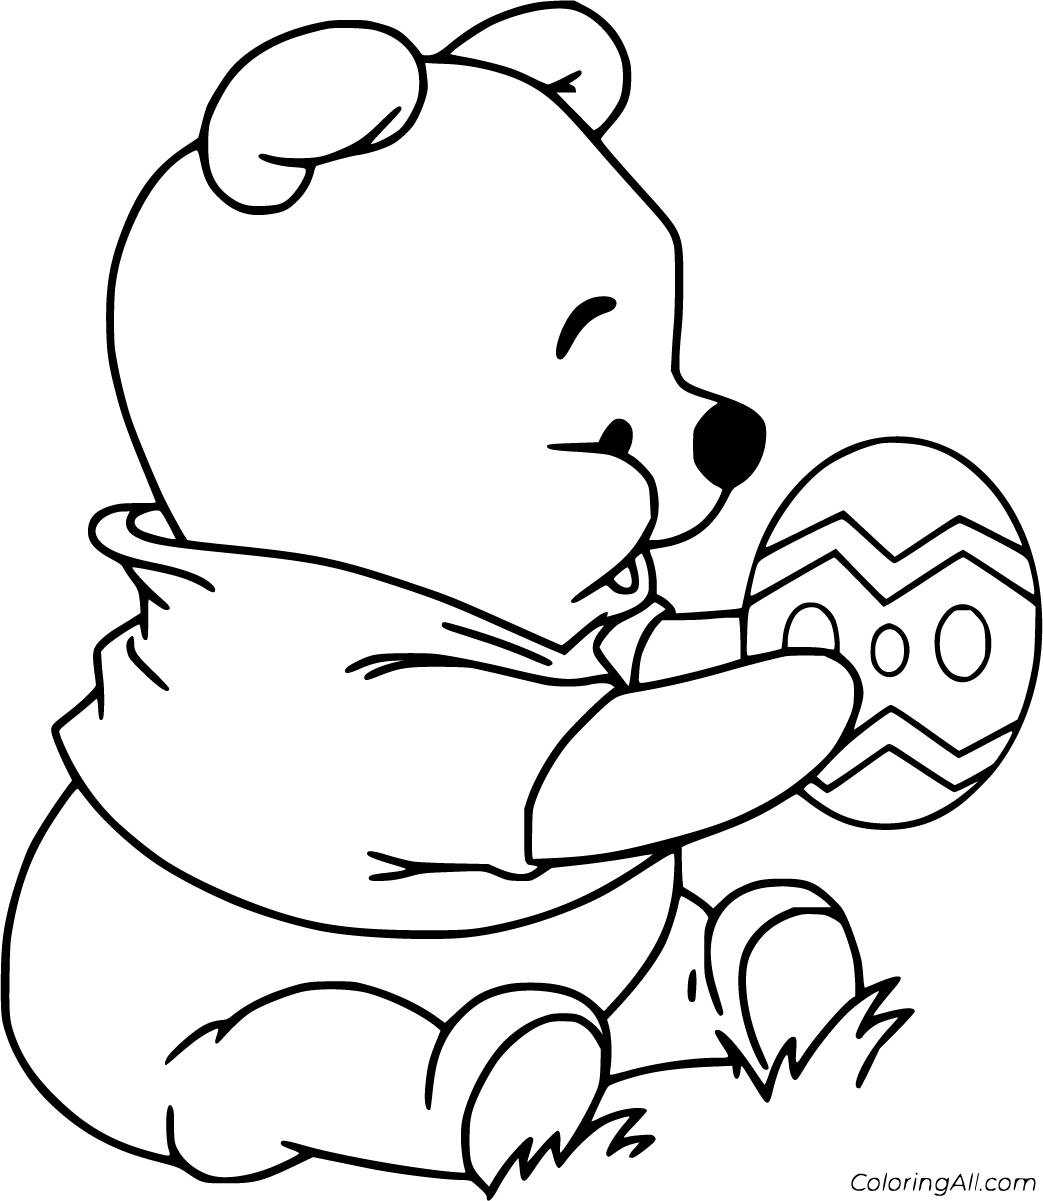 Easter Cartoons Coloring Pages   ColoringAll